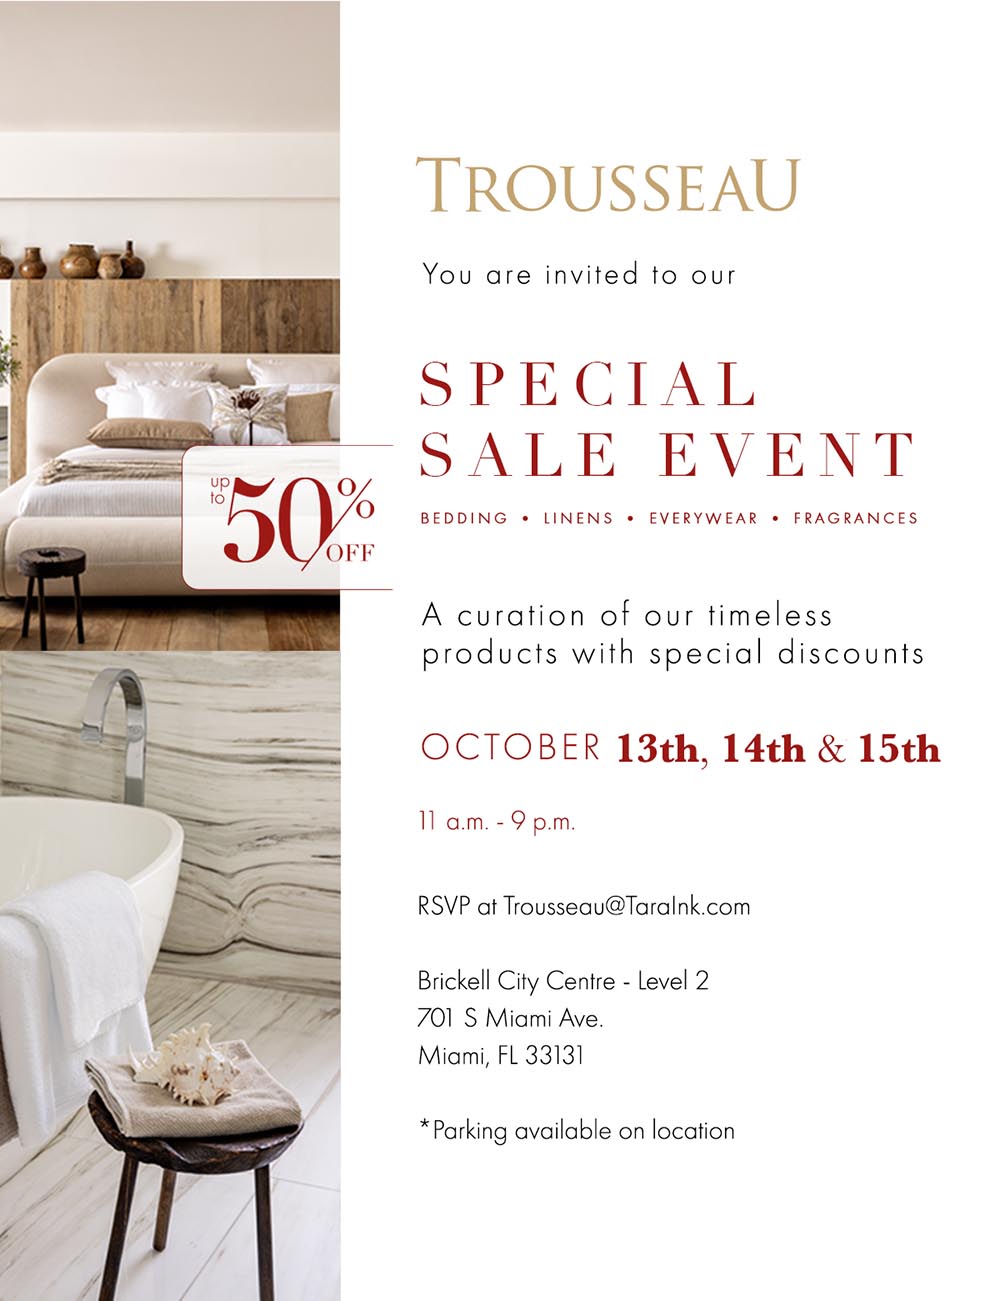 TROUSSEAU: Brazilian Luxury Bed Linen, Bath, and Lifestyle Brand EXTENDED  Miami VIP Sale Event (Friday, Oct. 13 -Sunday, Oct. 15) at Brickell City  Centre